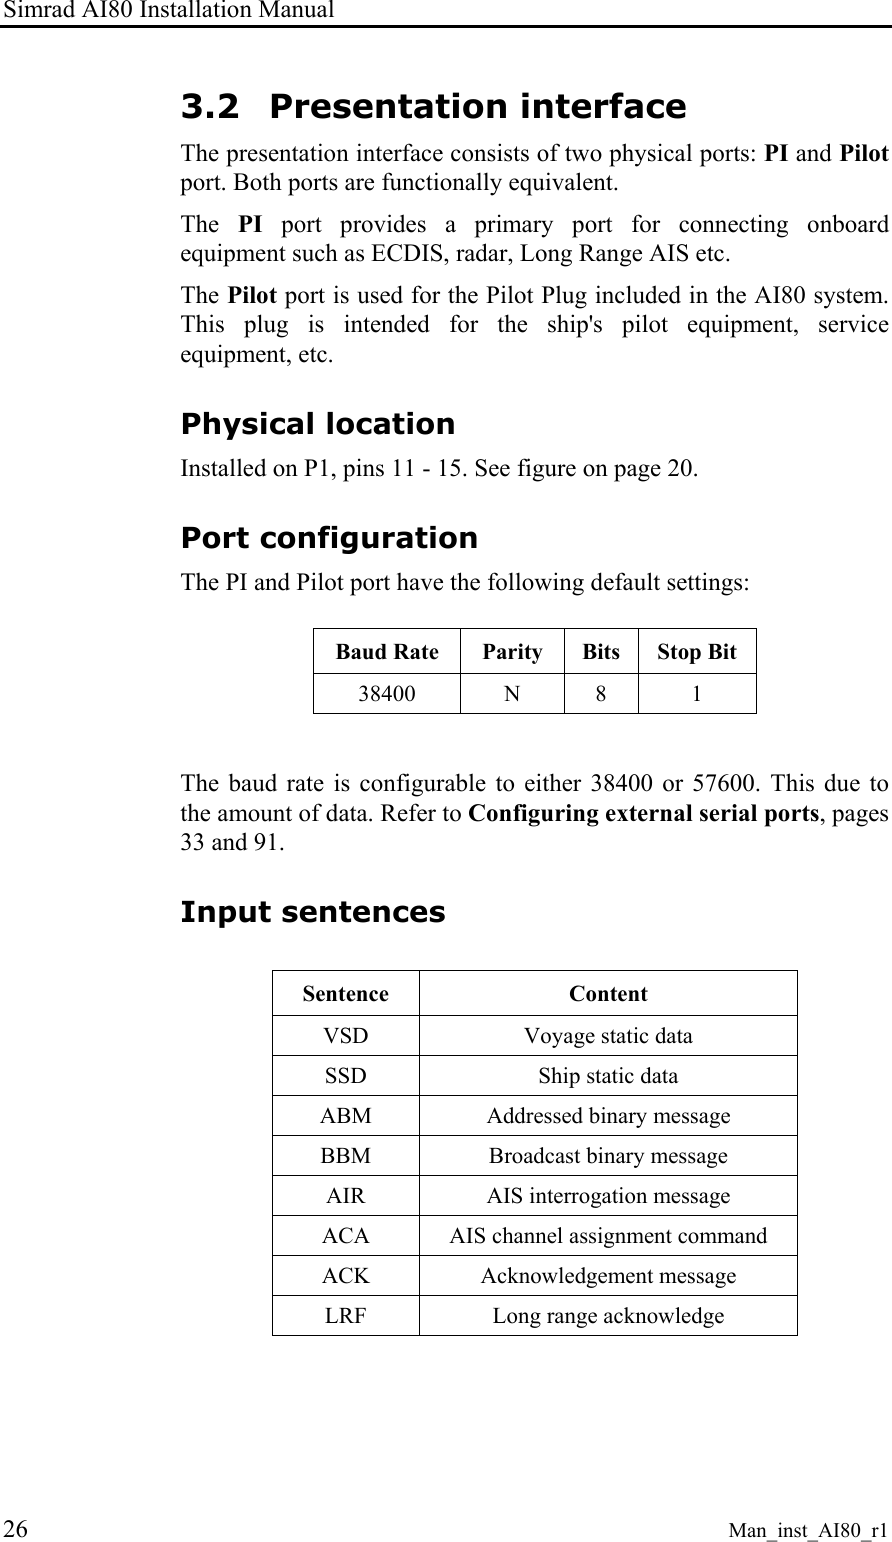 Simrad AI80 Installation Manual 26 Man_inst_AI80_r1 3.2 Presentation interface The presentation interface consists of two physical ports: PI and Pilot port. Both ports are functionally equivalent. The  PI port provides a primary port for connecting onboard equipment such as ECDIS, radar, Long Range AIS etc. The Pilot port is used for the Pilot Plug included in the AI80 system. This plug is intended for the ship&apos;s pilot equipment, service equipment, etc. Physical location Installed on P1, pins 11 - 15. See figure on page 20. Port configuration The PI and Pilot port have the following default settings:  Baud Rate  Parity  Bits  Stop Bit 38400 N 8 1  The baud rate is configurable to either 38400 or 57600. This due to the amount of data. Refer to Configuring external serial ports, pages 33 and 91. Input sentences  Sentence  Content VSD  Voyage static data SSD  Ship static data ABM  Addressed binary message BBM  Broadcast binary message AIR  AIS interrogation message ACA  AIS channel assignment command ACK Acknowledgement message LRF  Long range acknowledge 